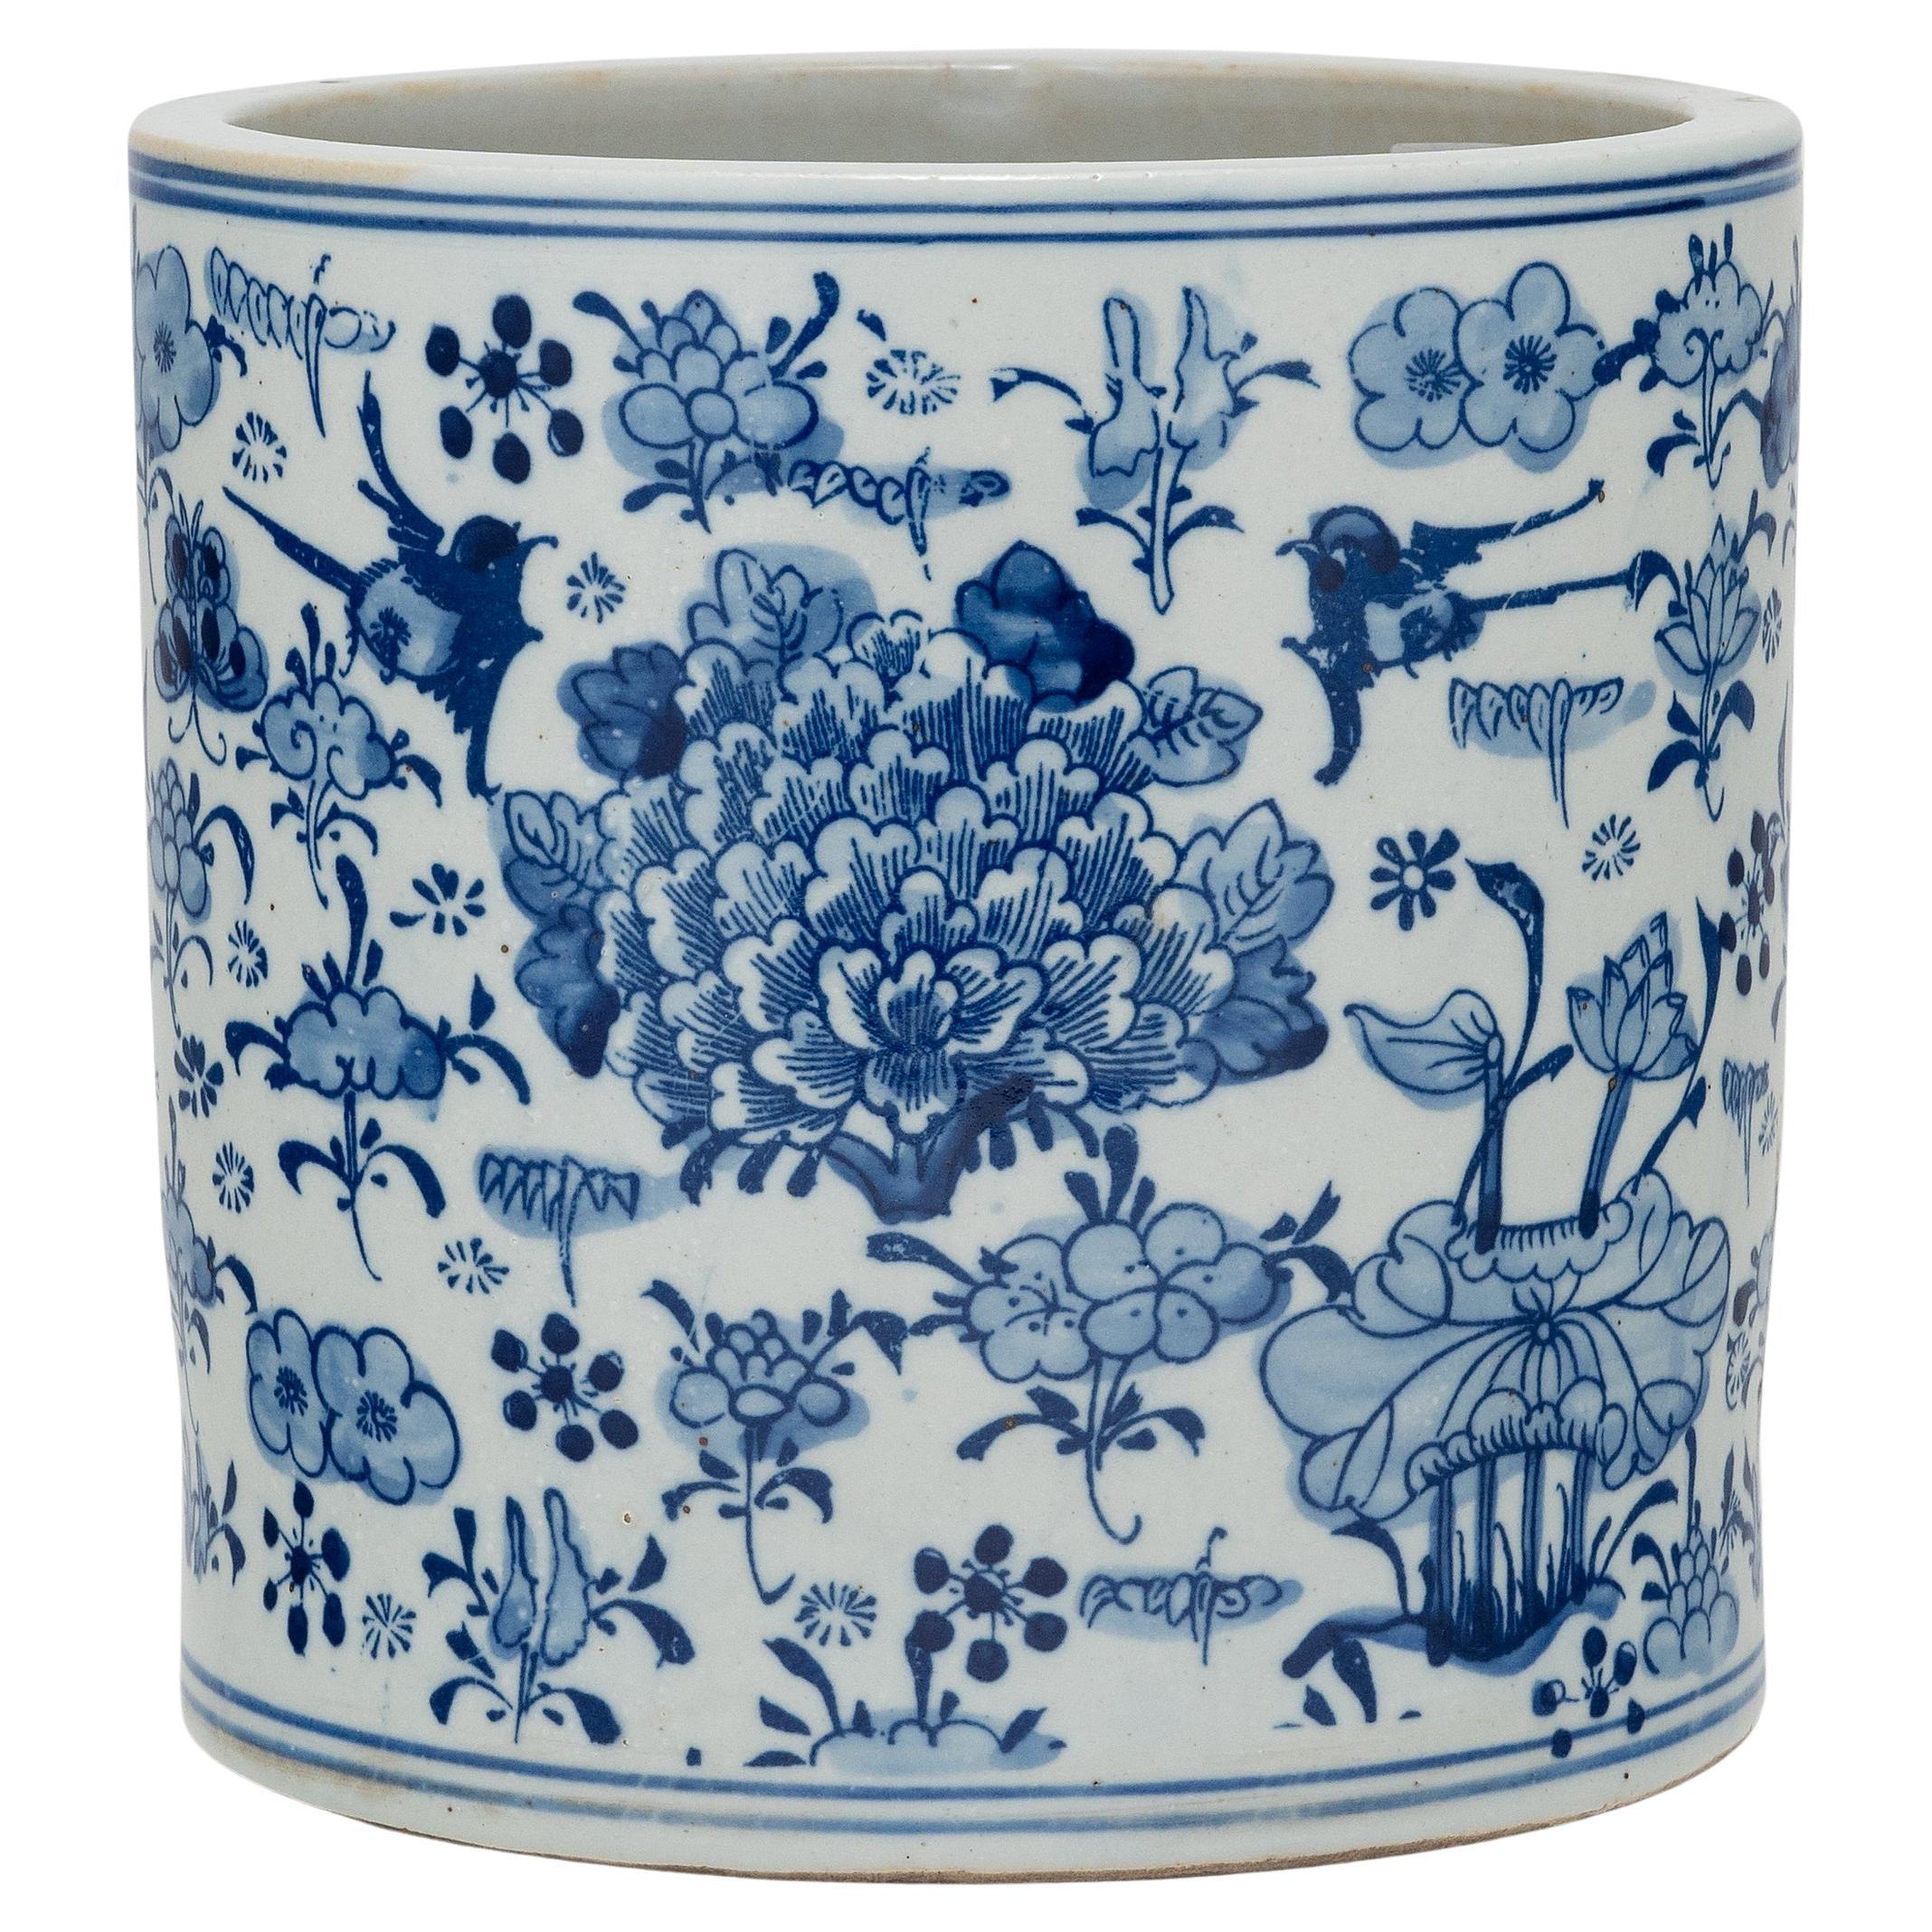 Blue and White Floral Brush Pot